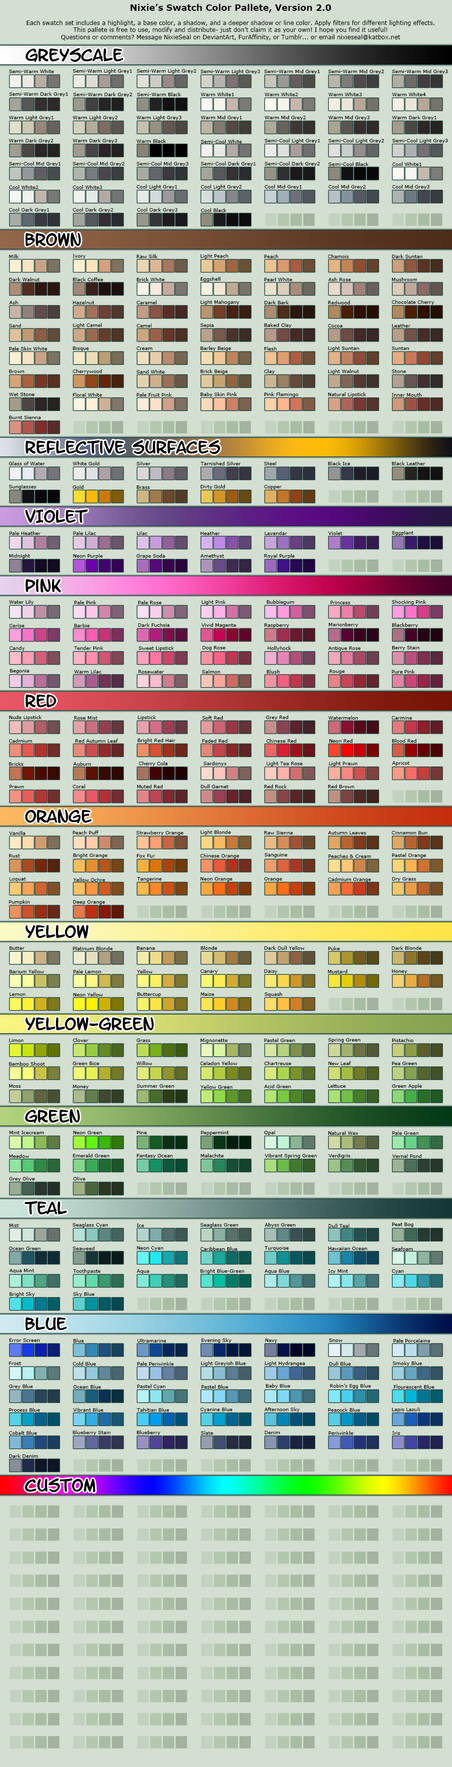 Vibrant Cell Shading Swatch by Deserthawk129 on DeviantArt